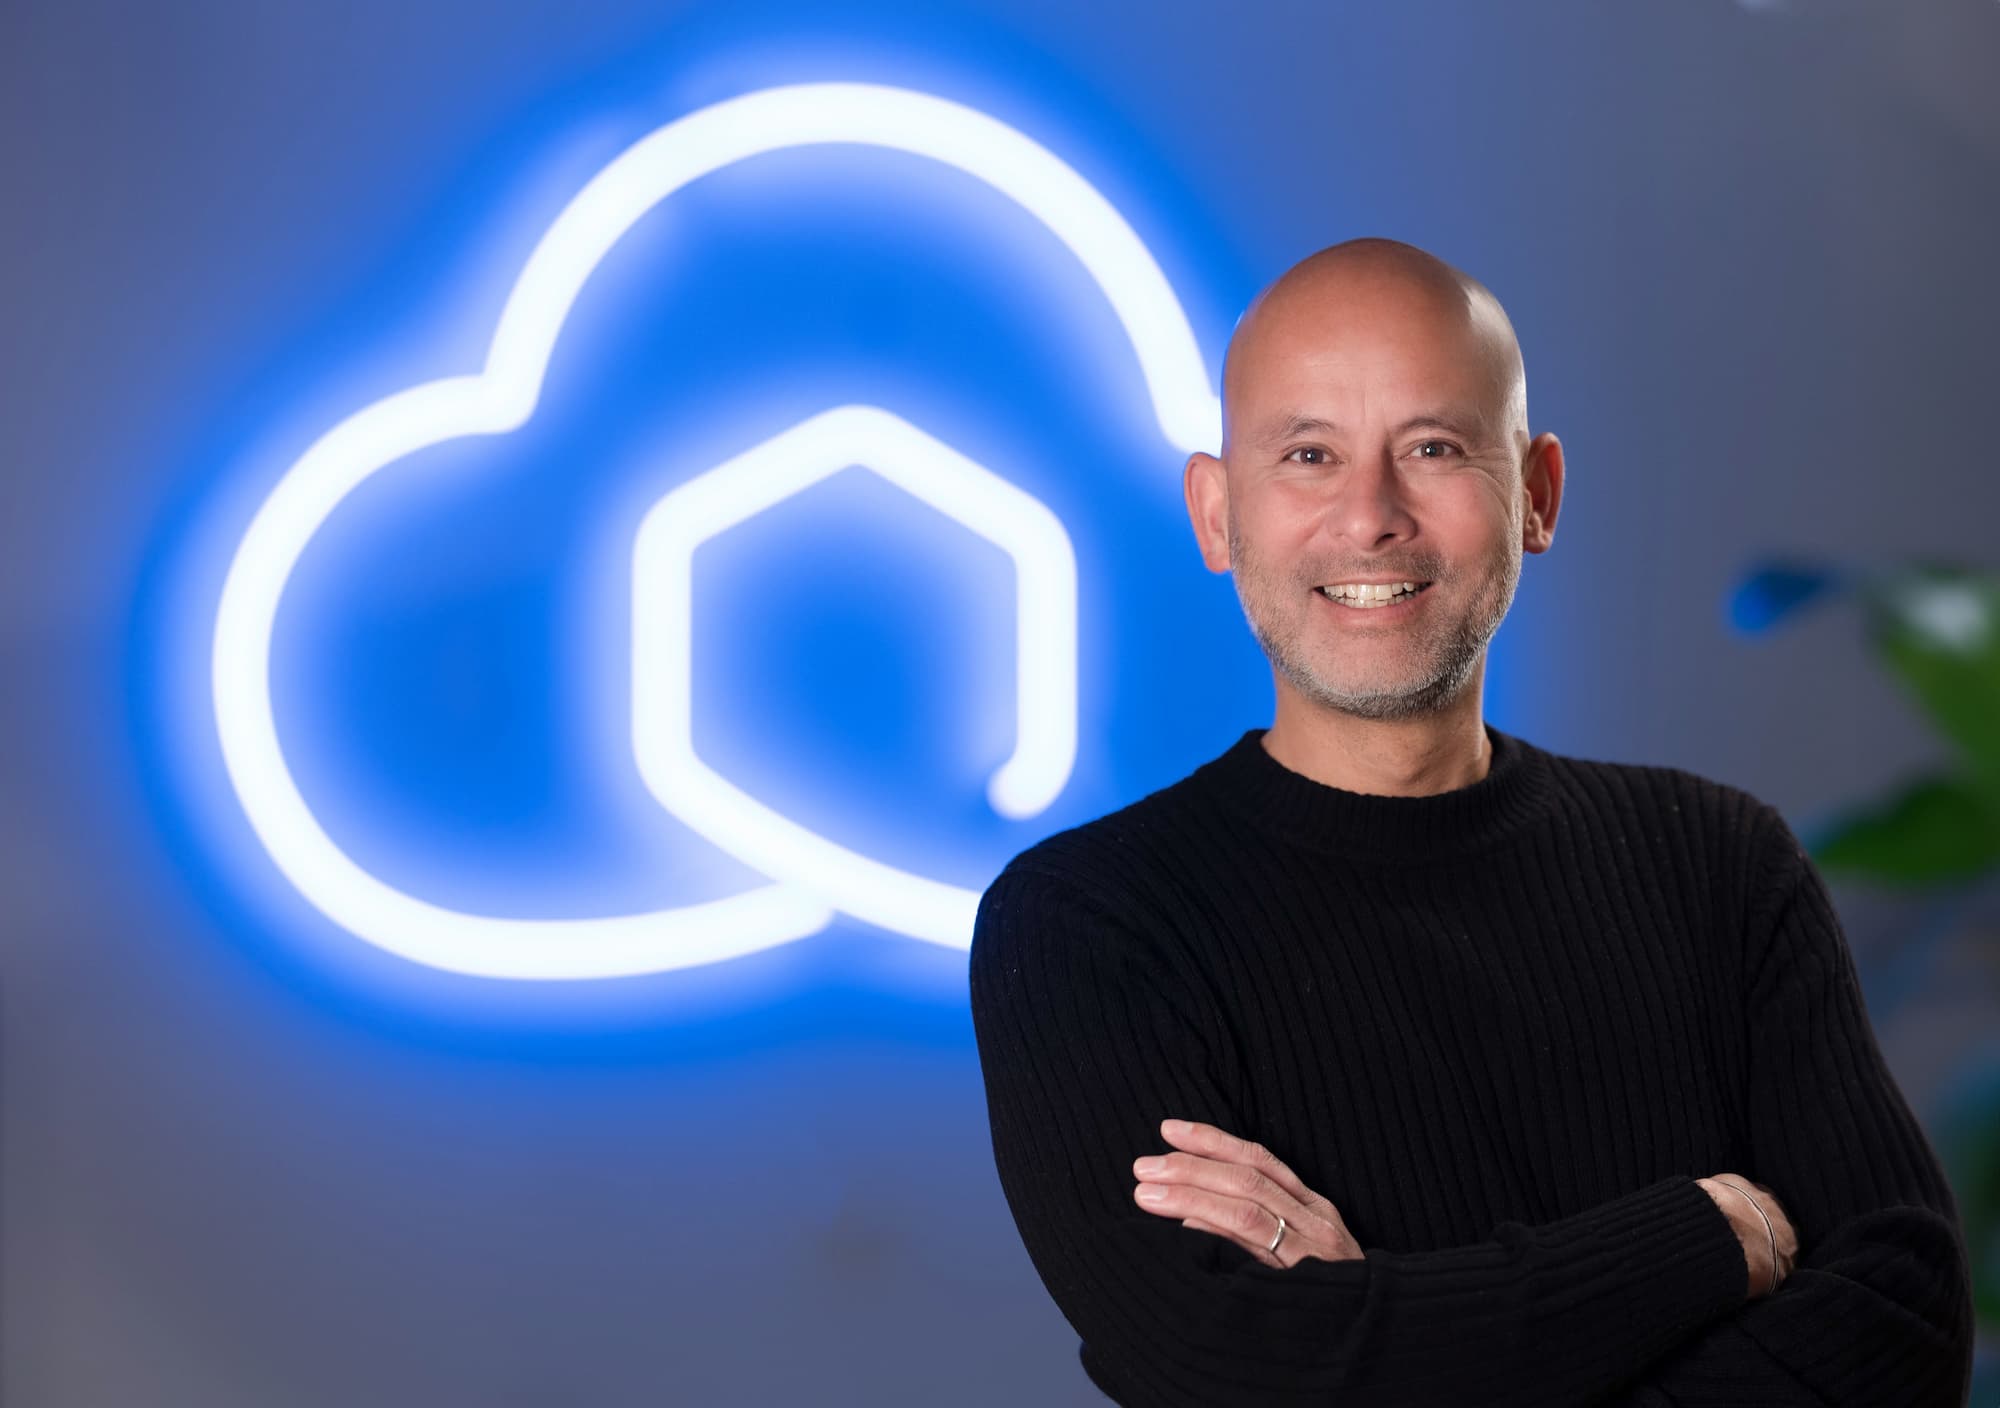 Sendcloud Strengthens Leadership Team with Appointment of Mark Appel as Chief Marketing Officer